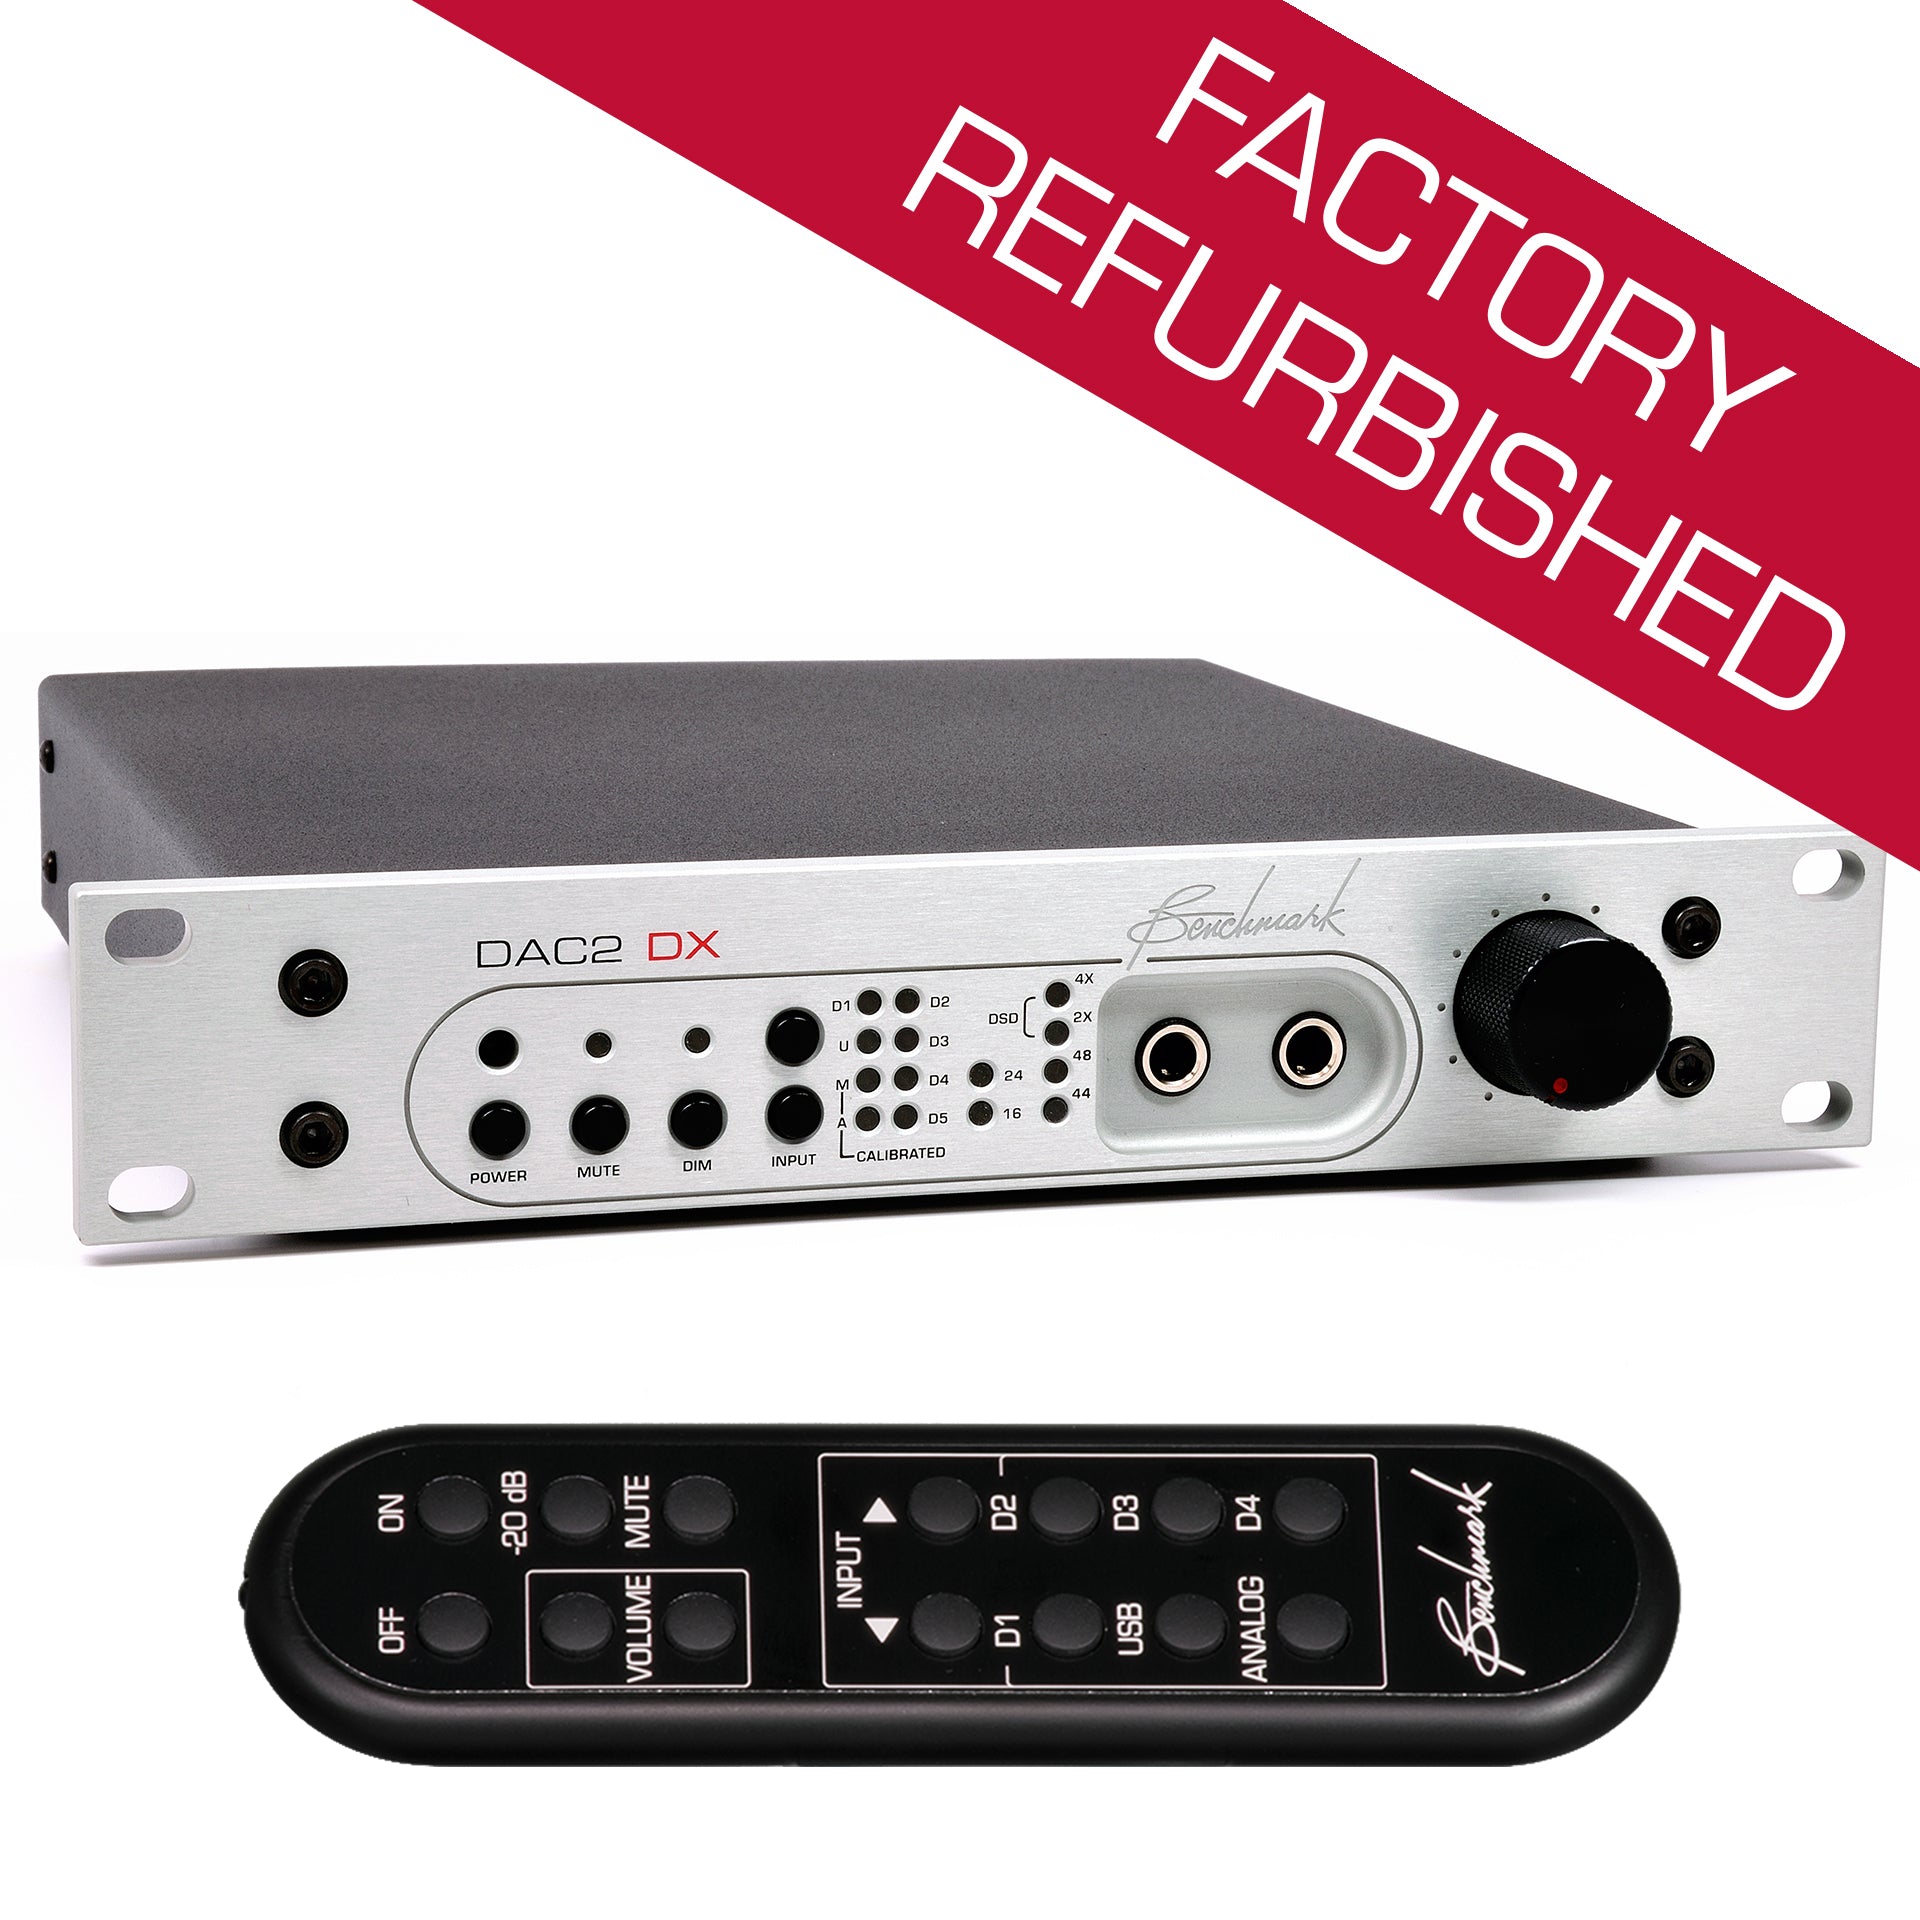 Refurbished Silver Rackmount DAC2 DX with Remote Control